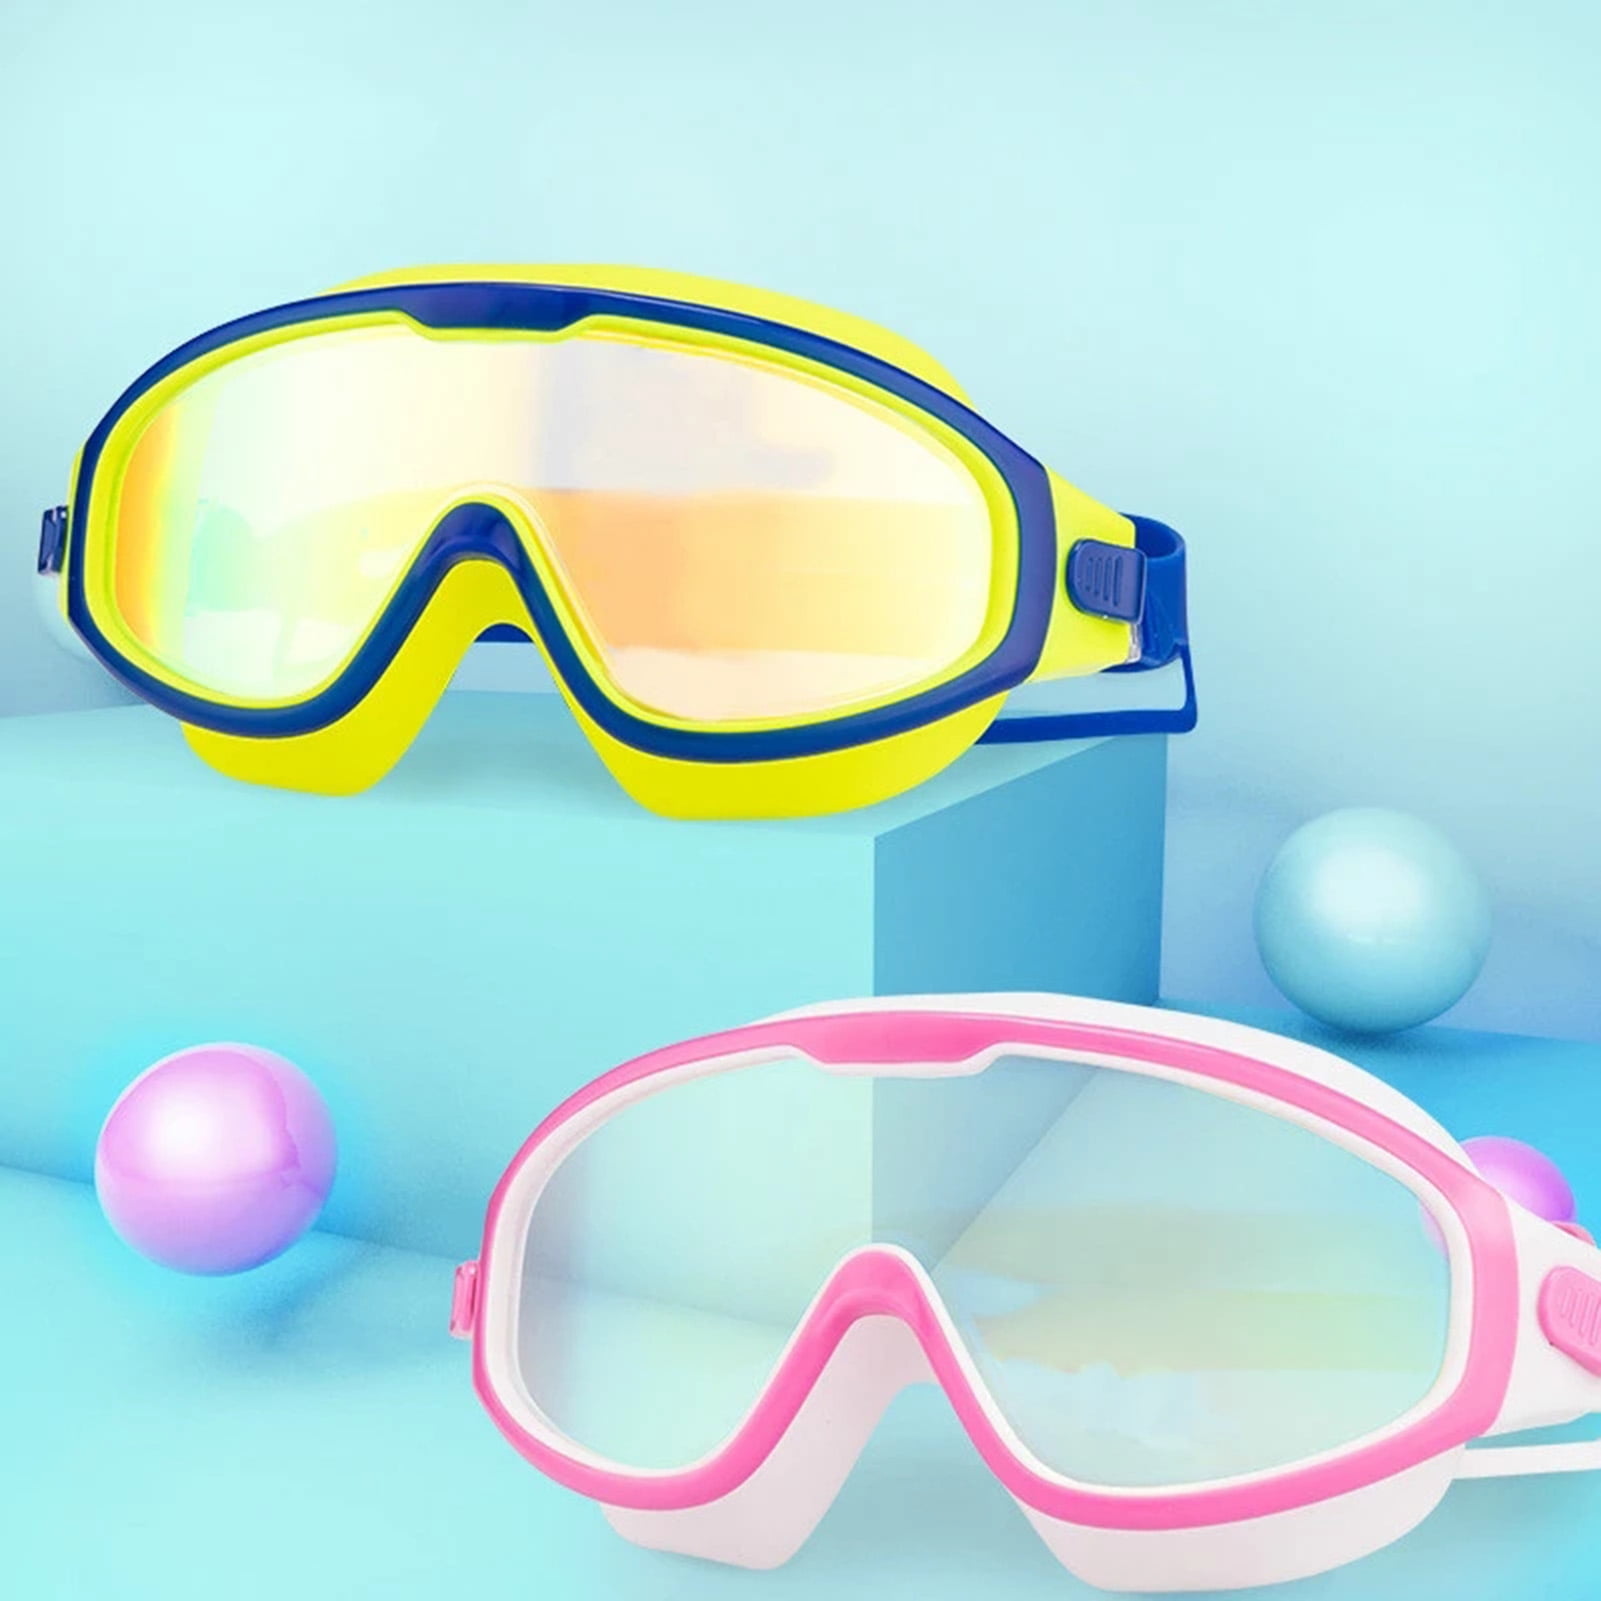 Limited Stock! Kids Mirrored Anti-fog Swimming Goggles With Case Was £19.99 